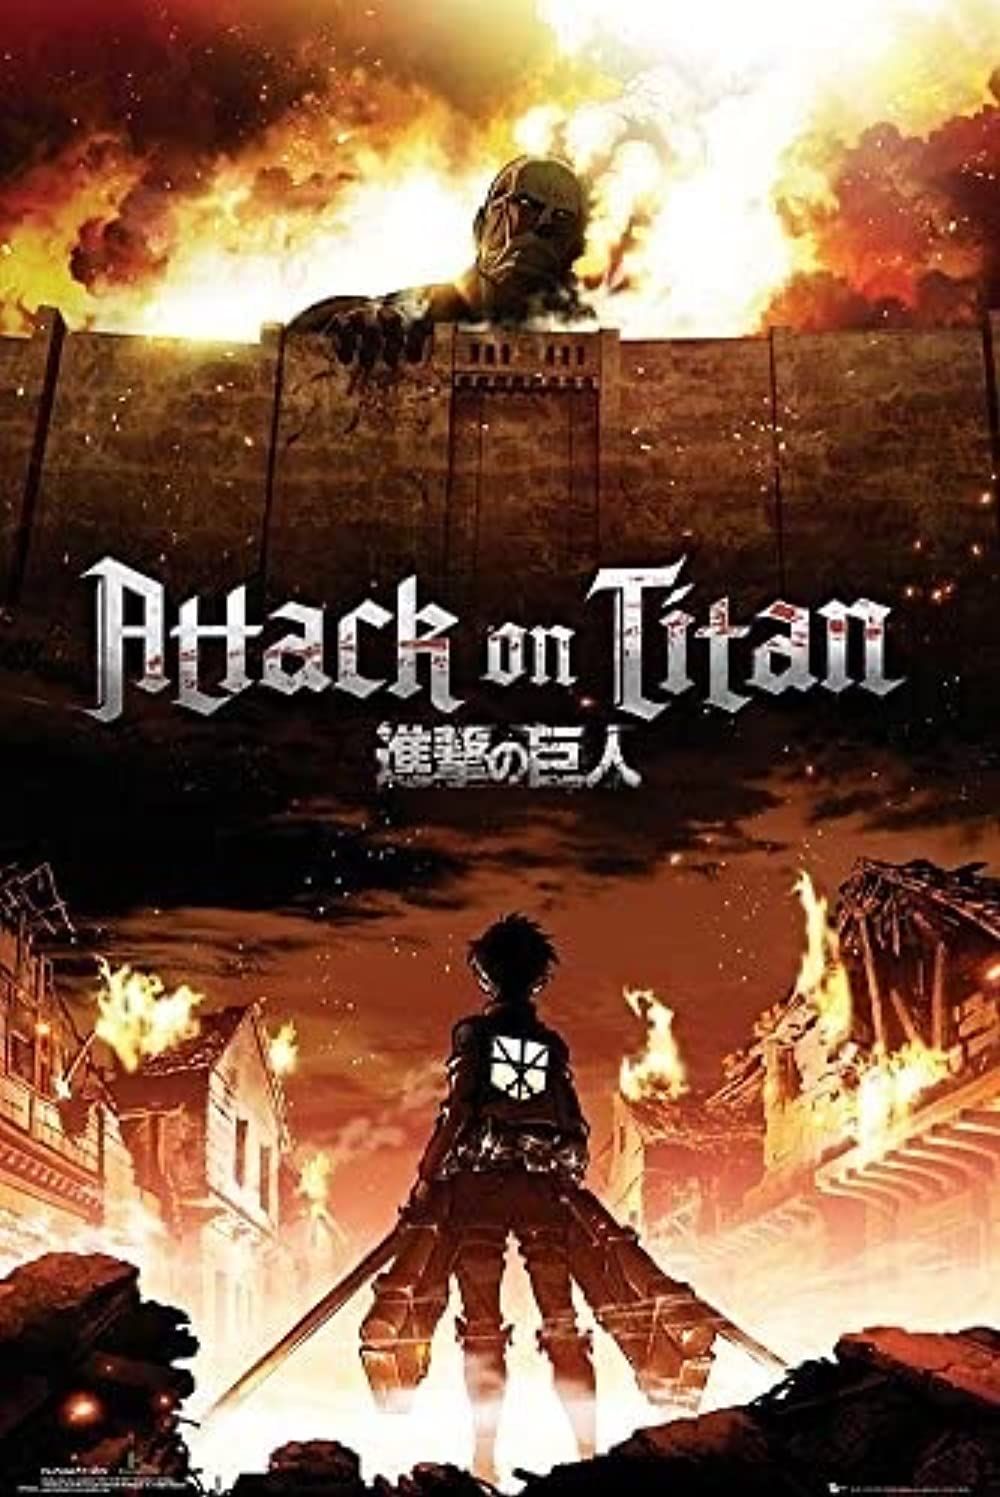 Attack on Titan Final Season Part 3 rumored to have multiple cours and a  spring 2023 release date